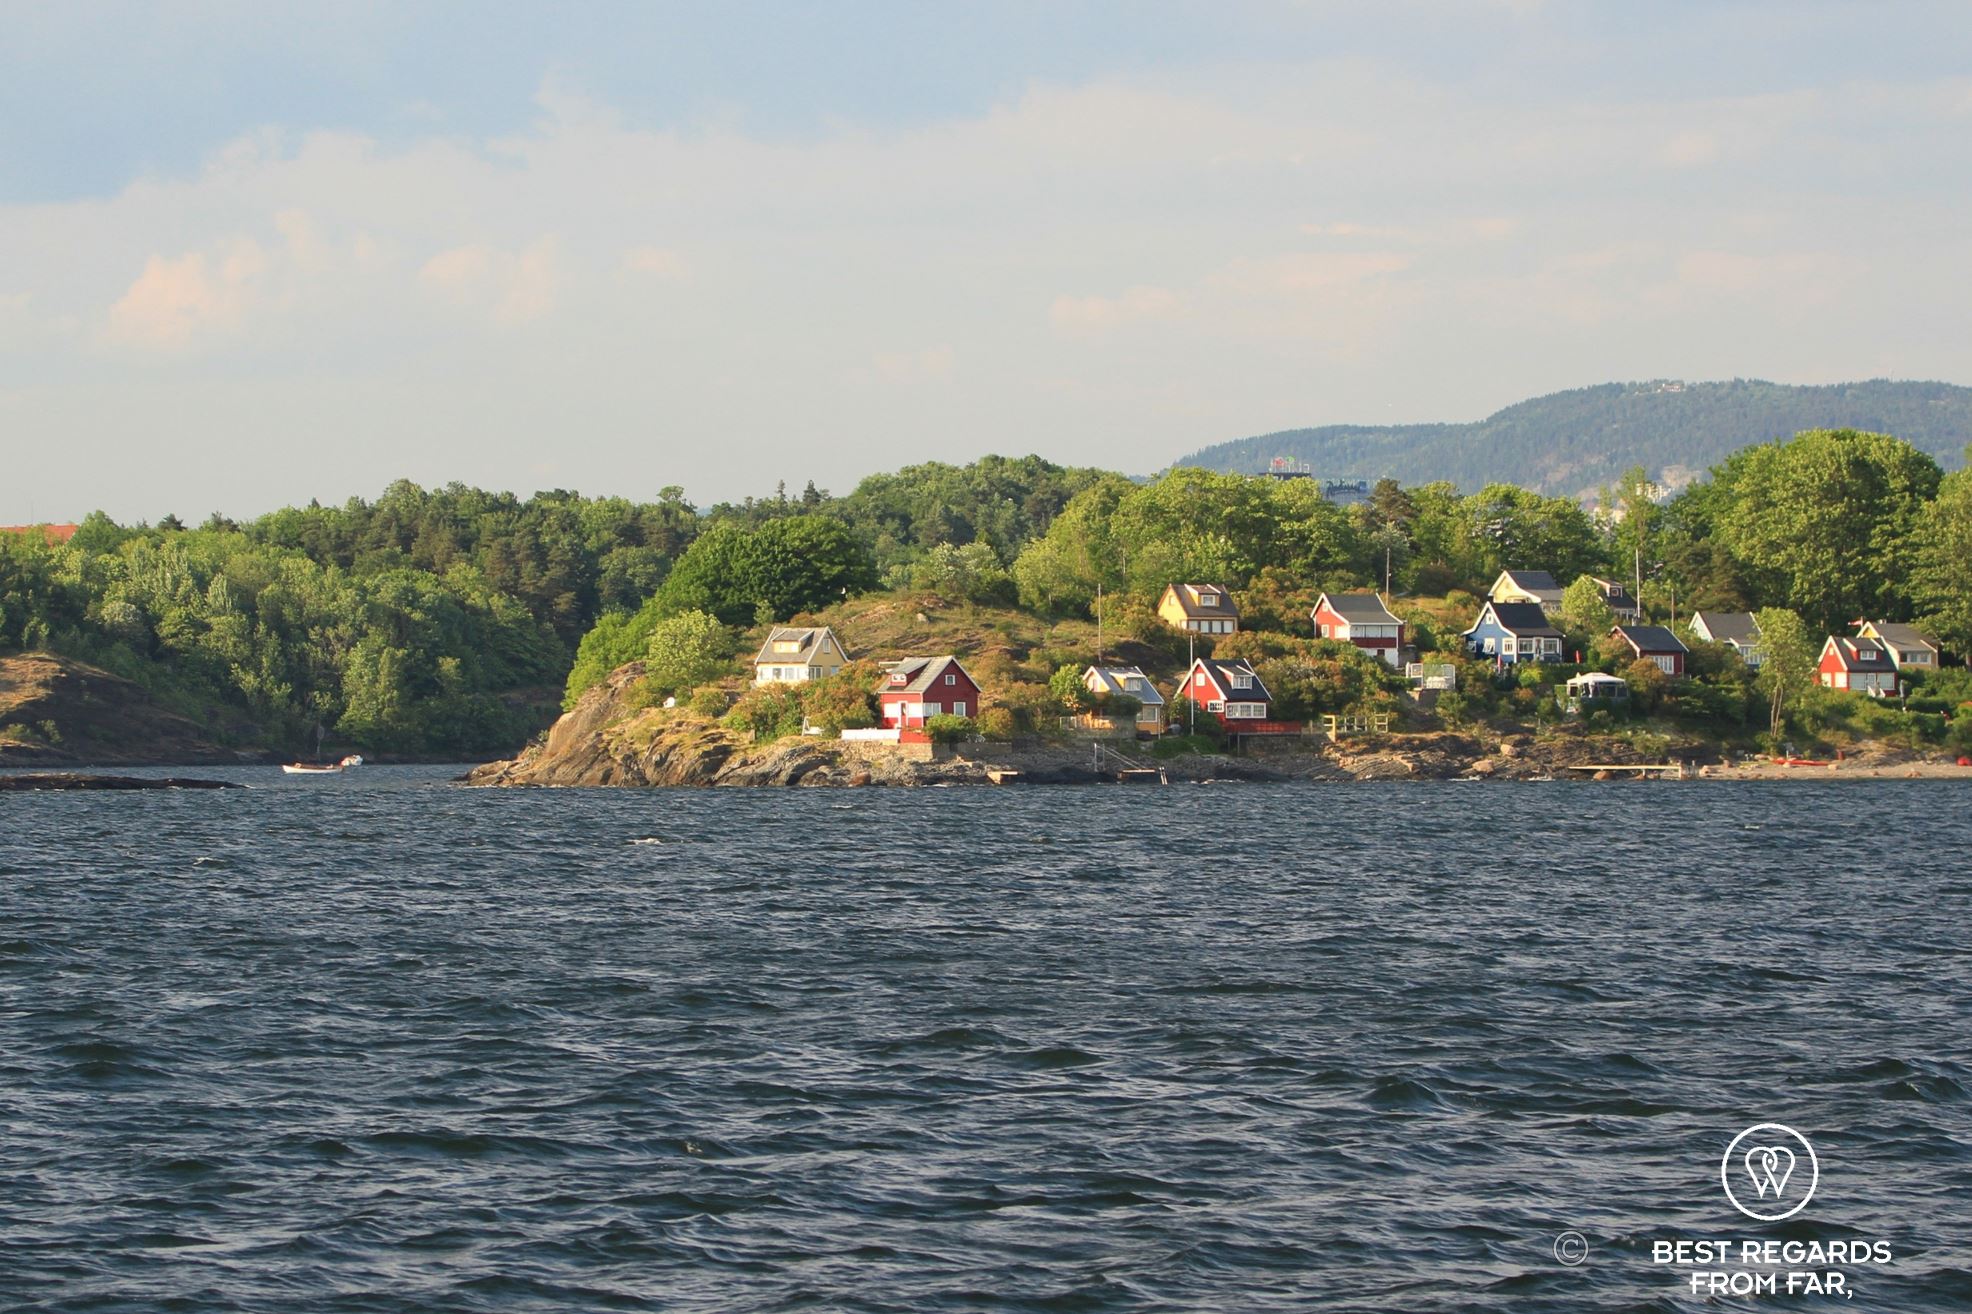 Small island with wooden houses seen from the water. Bleikoya, Oslo, Norway.